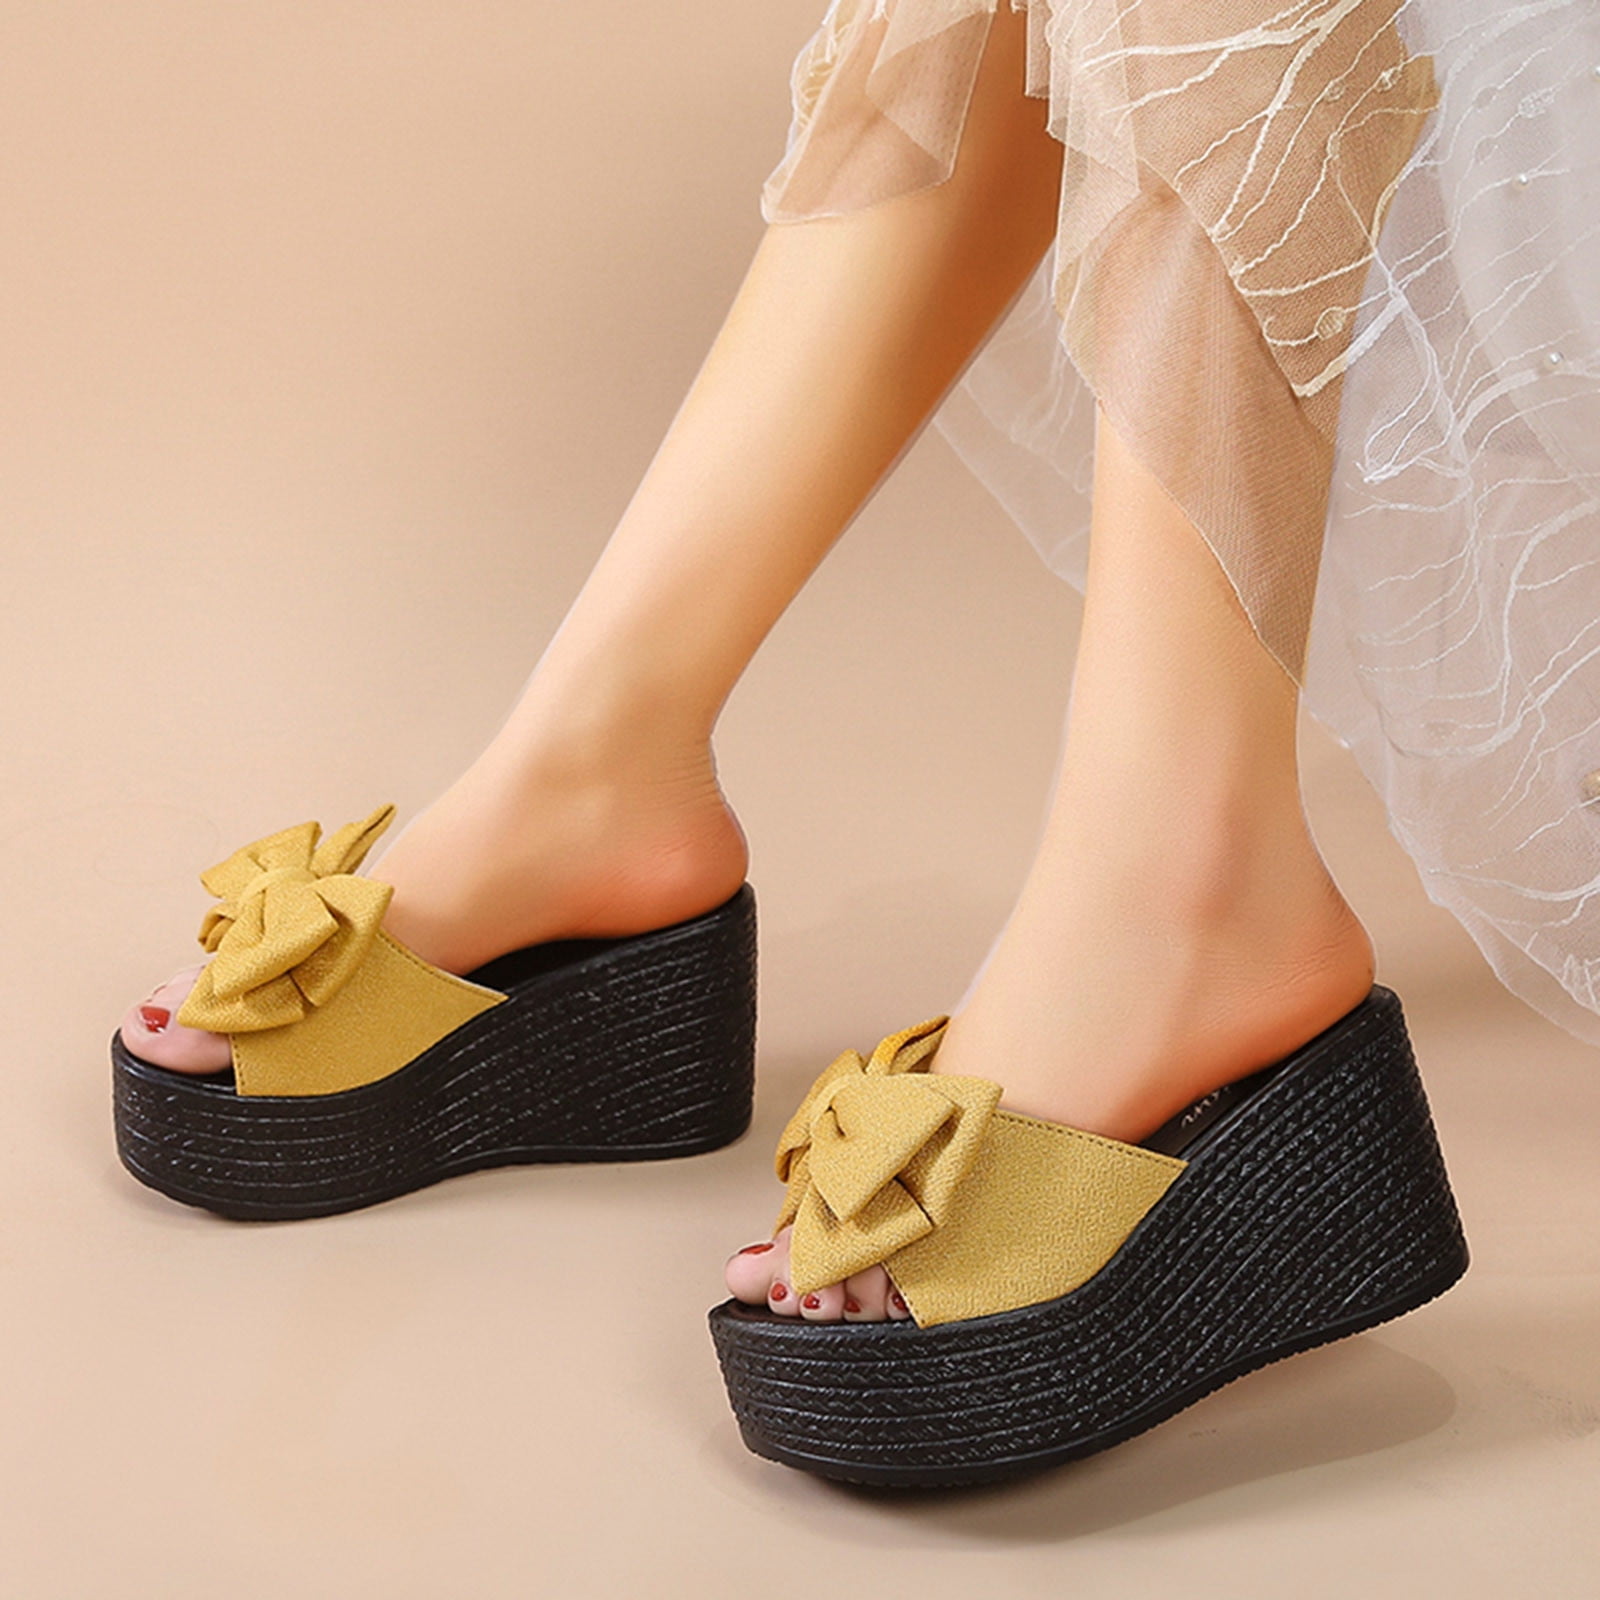 US 5-9 Women Platform Dress Sandal,Ankle High Heels Peep Toe Lace Up Wedge Shoes for Party Casual 